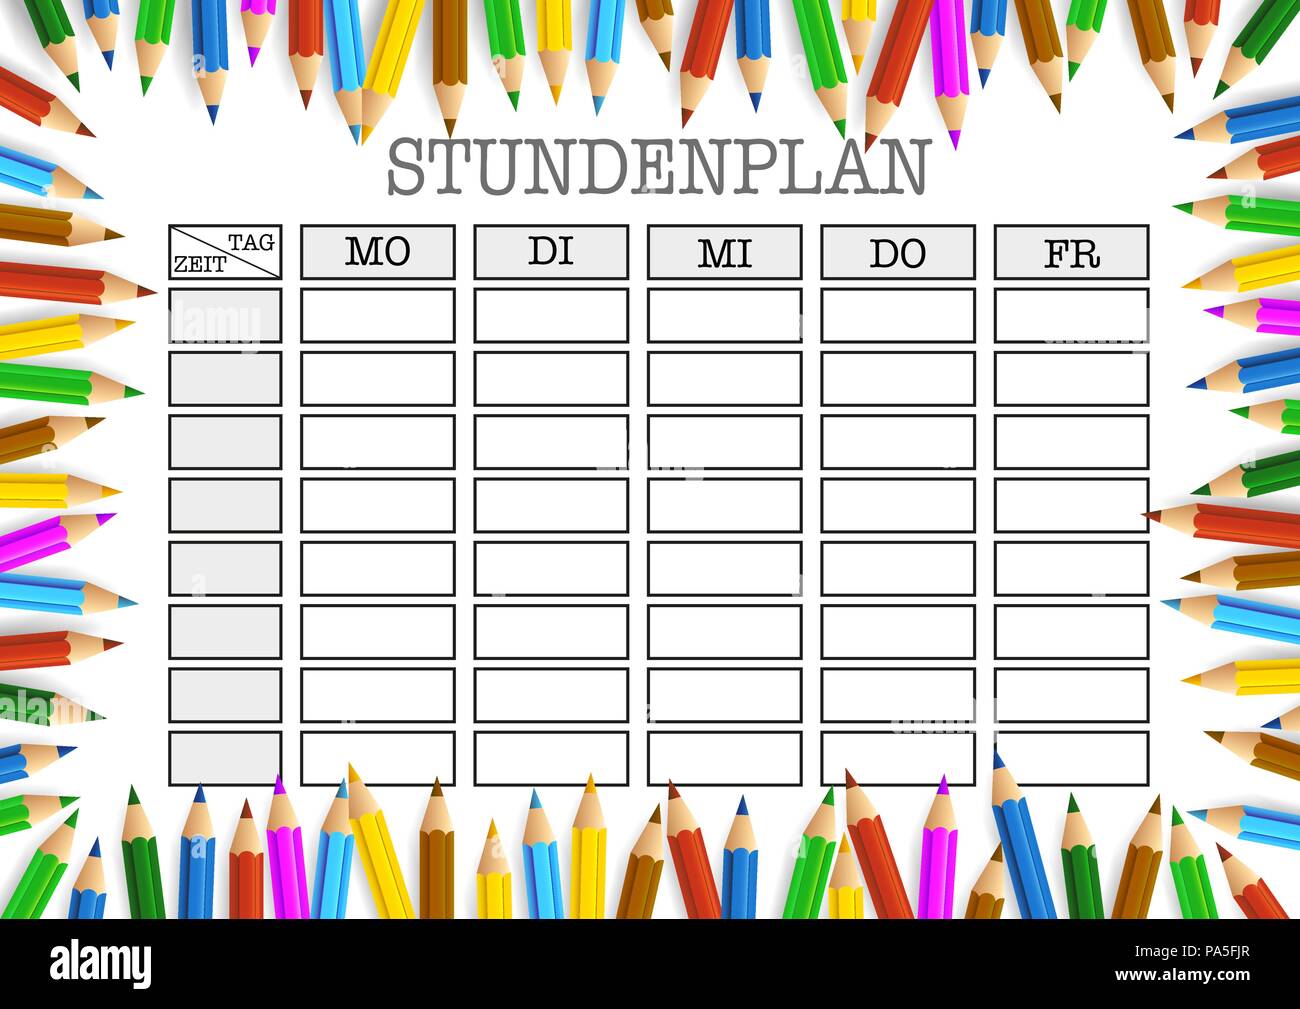 STUNDENPLAN, German for class schedule, surrounded by colored pencils template Stock Vector